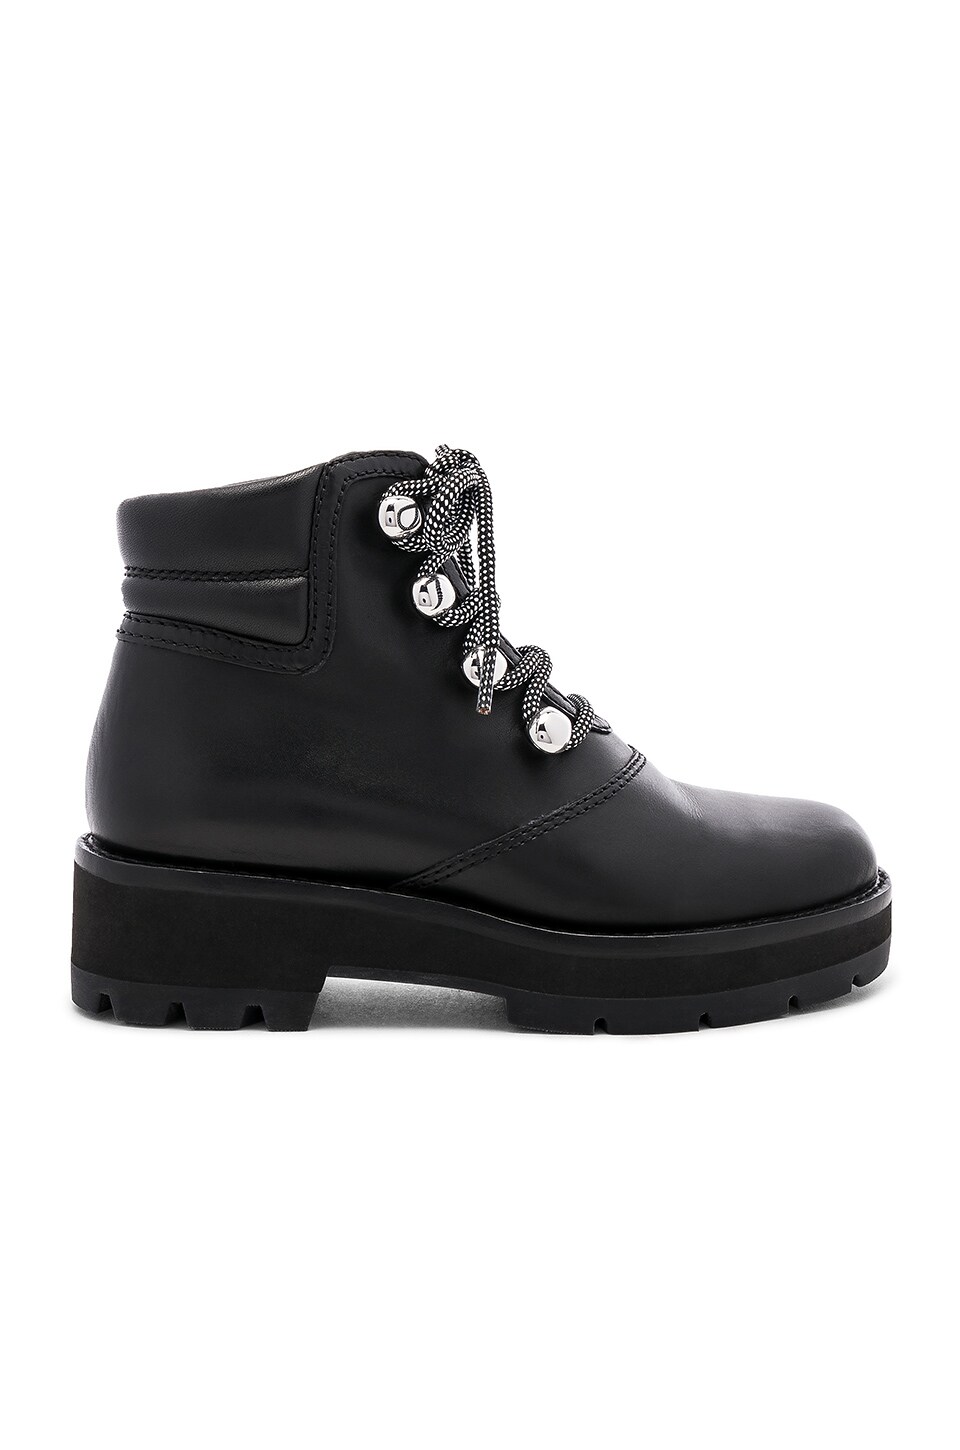 3.1 PHILLIP LIM / フィリップ リム DYLAN LACE UP HIKING BOOT